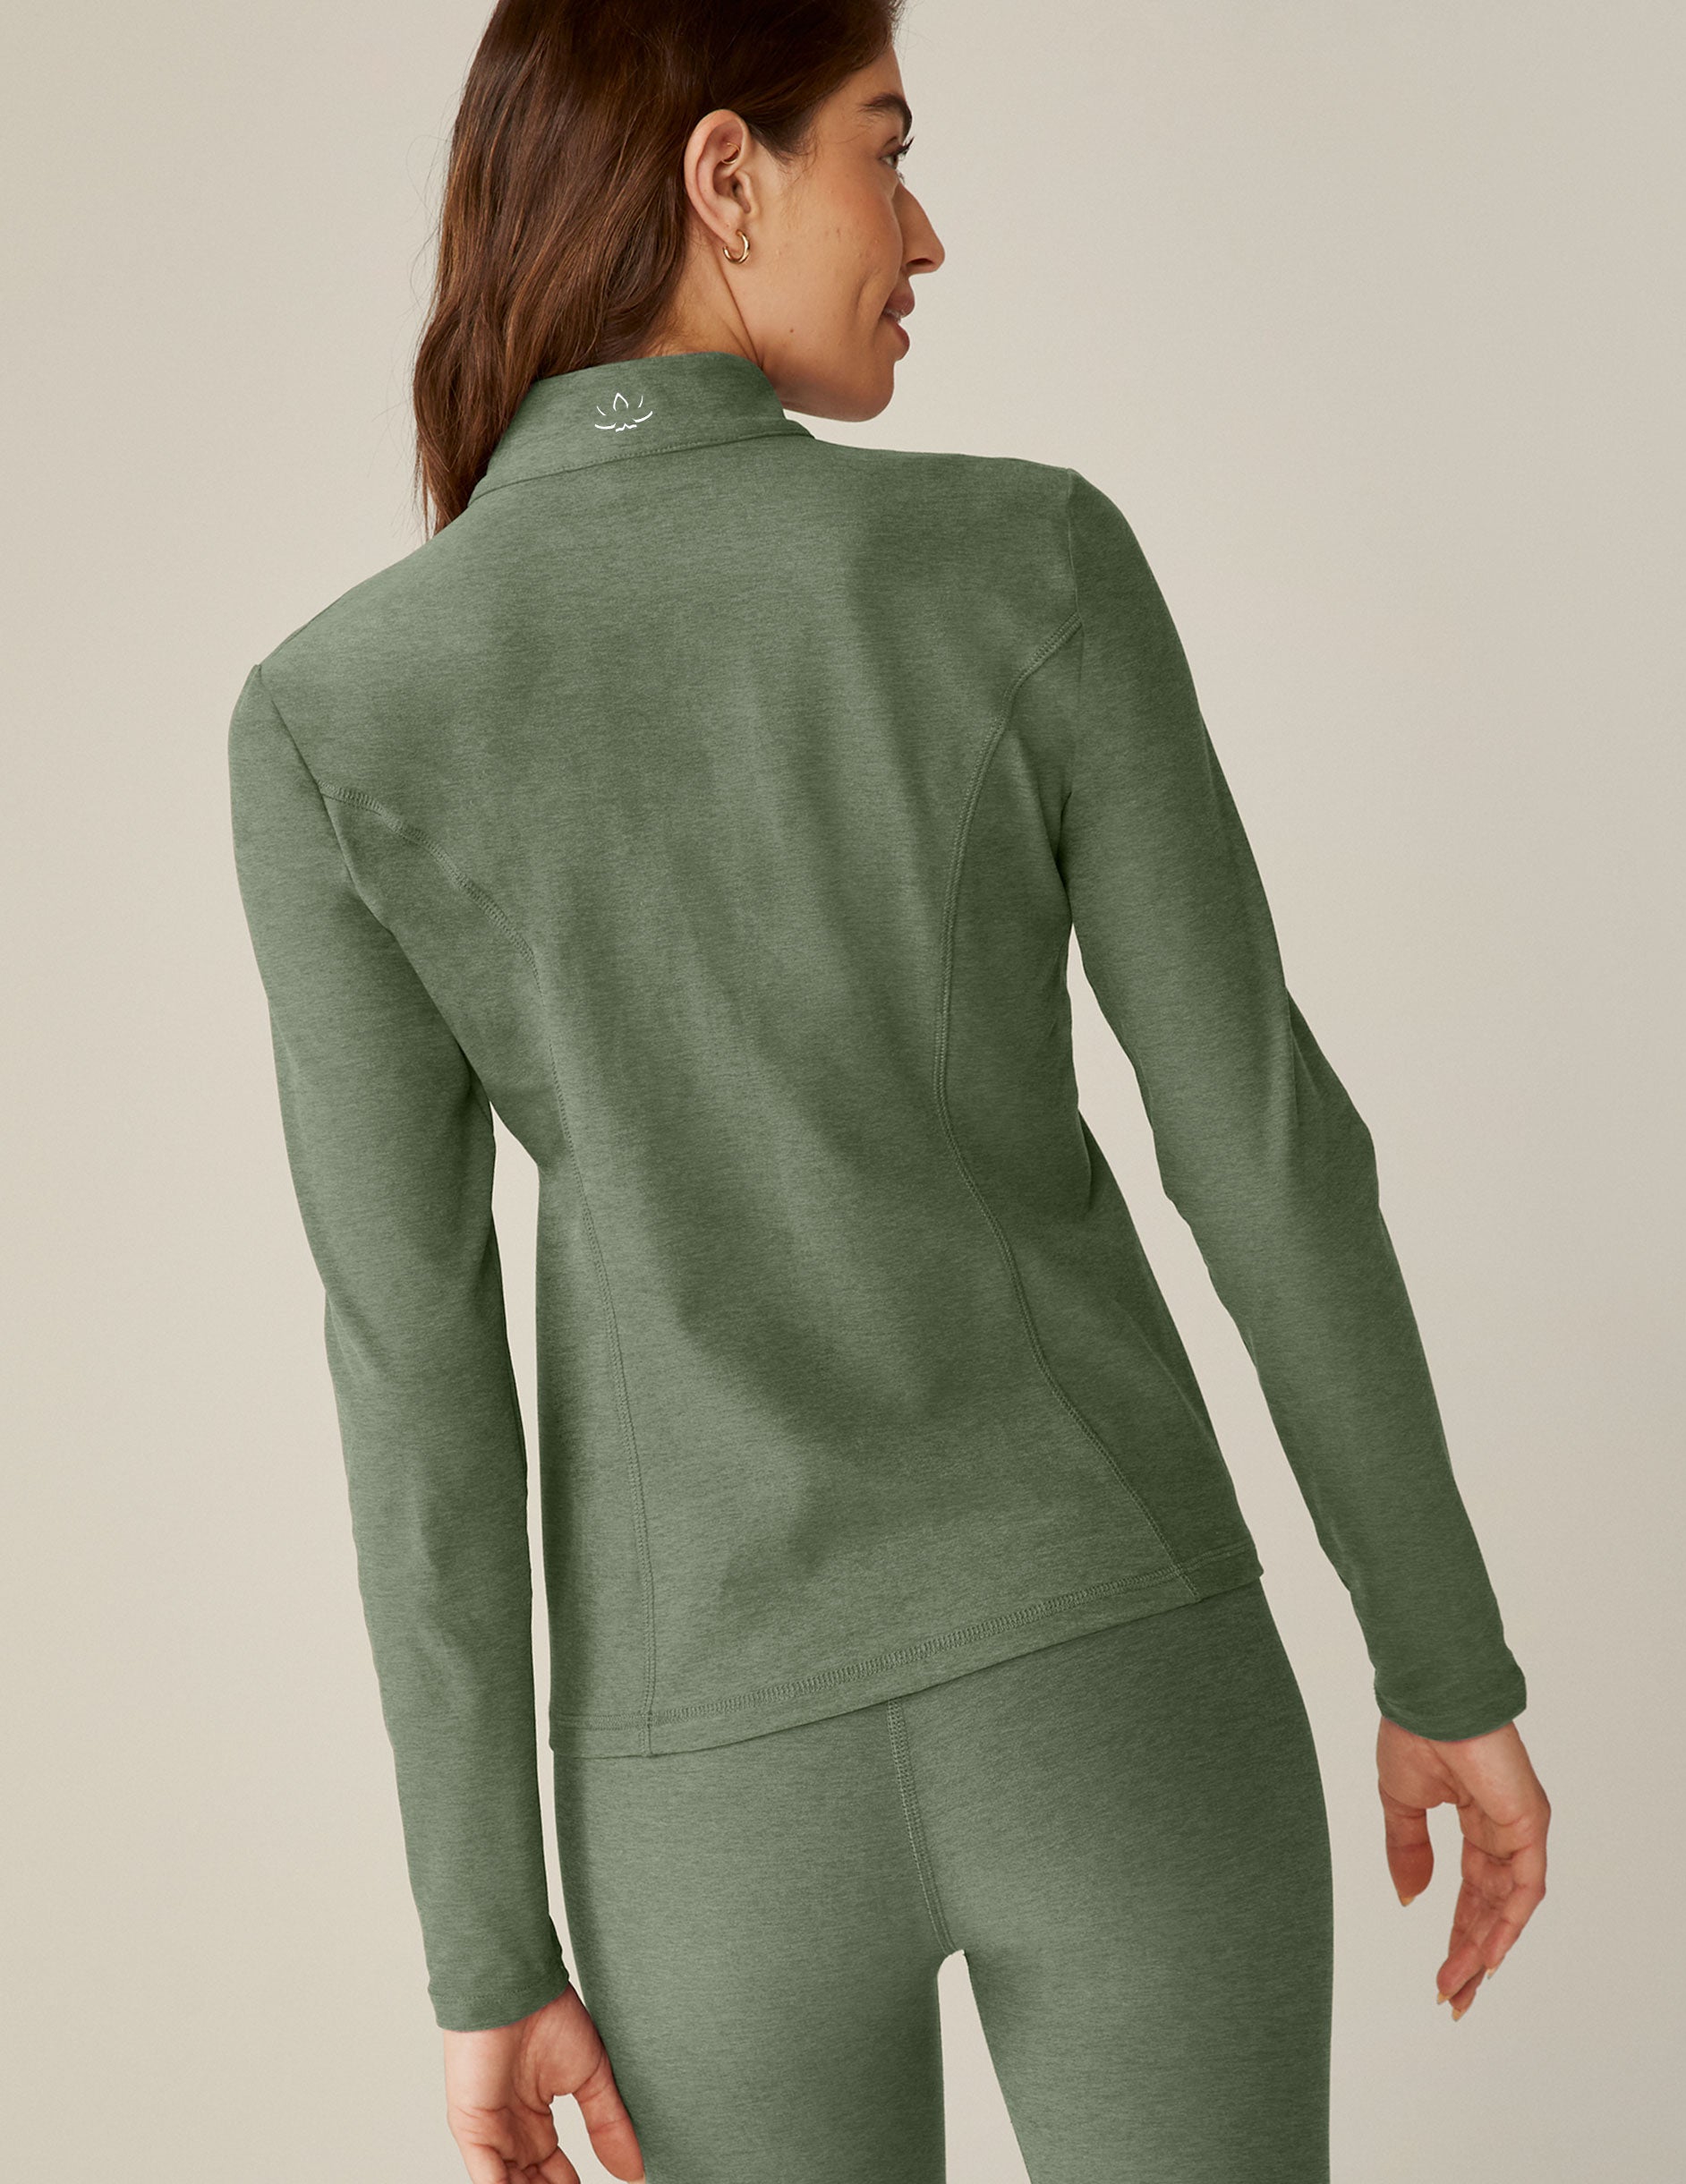 green mock-neck zip-up jacket with pockets.